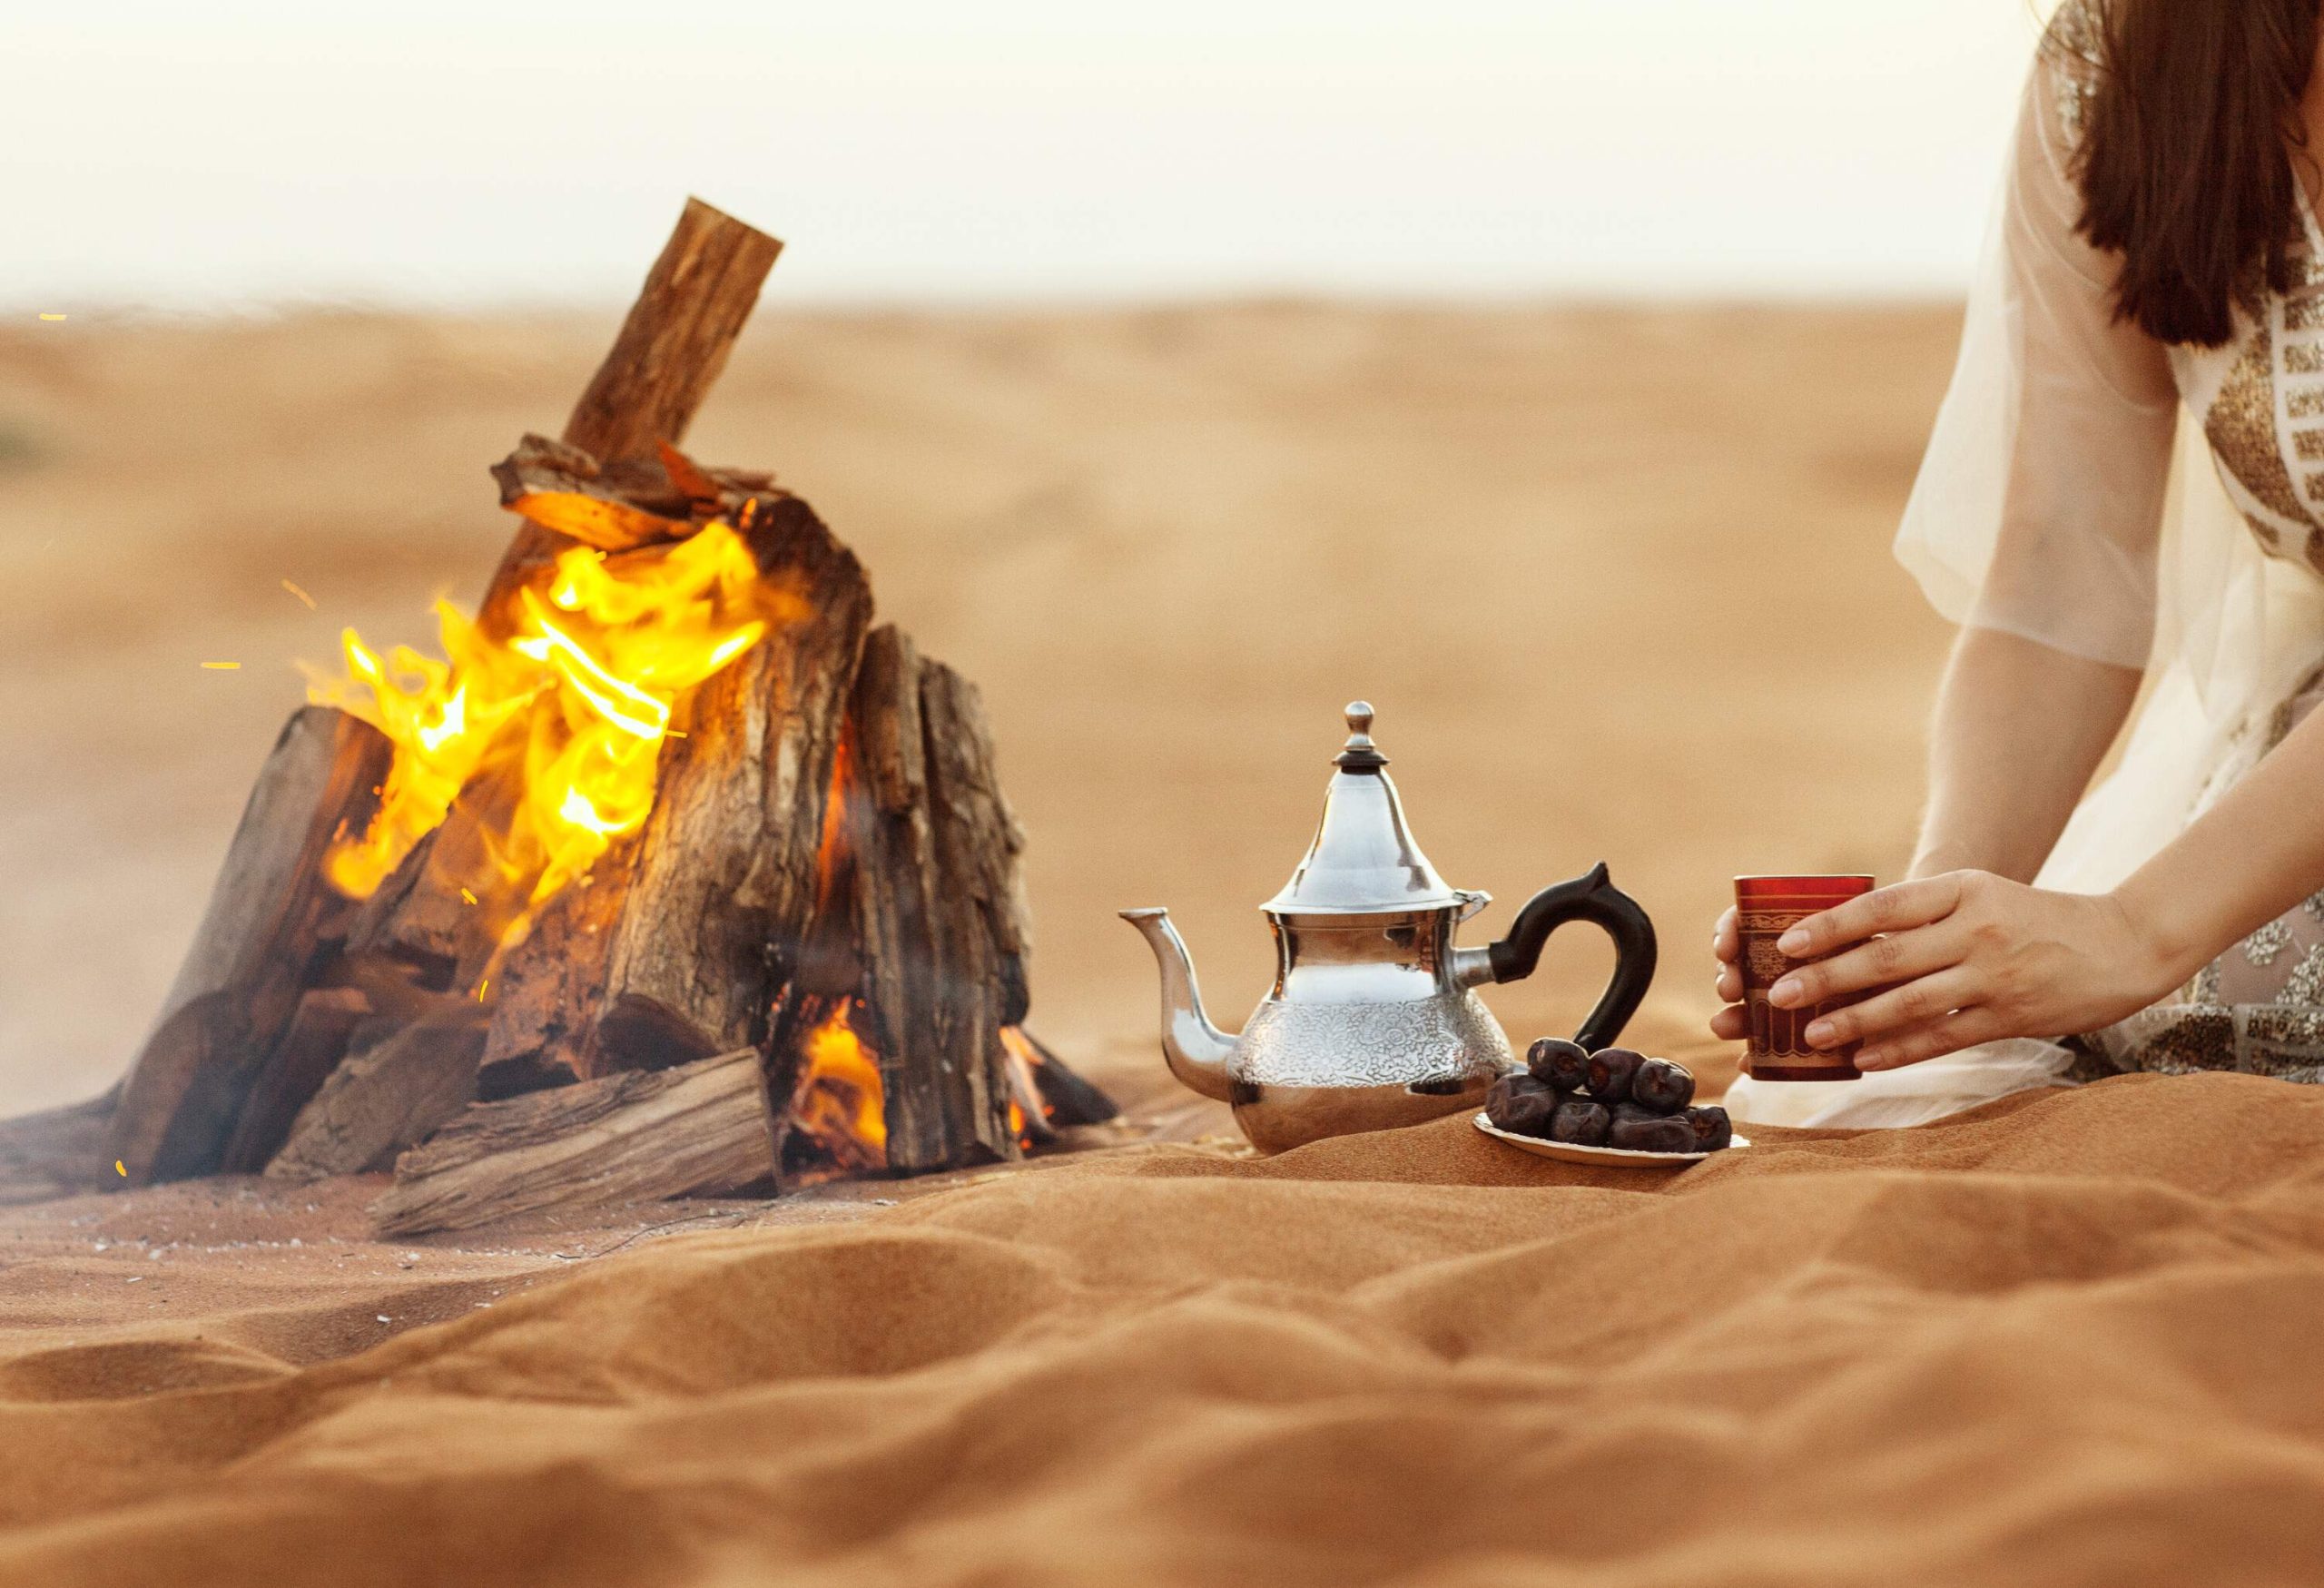 A woman holding a cup sitting next to an Arabic teapot and a small plate of dates by a campfire on a sand dune.